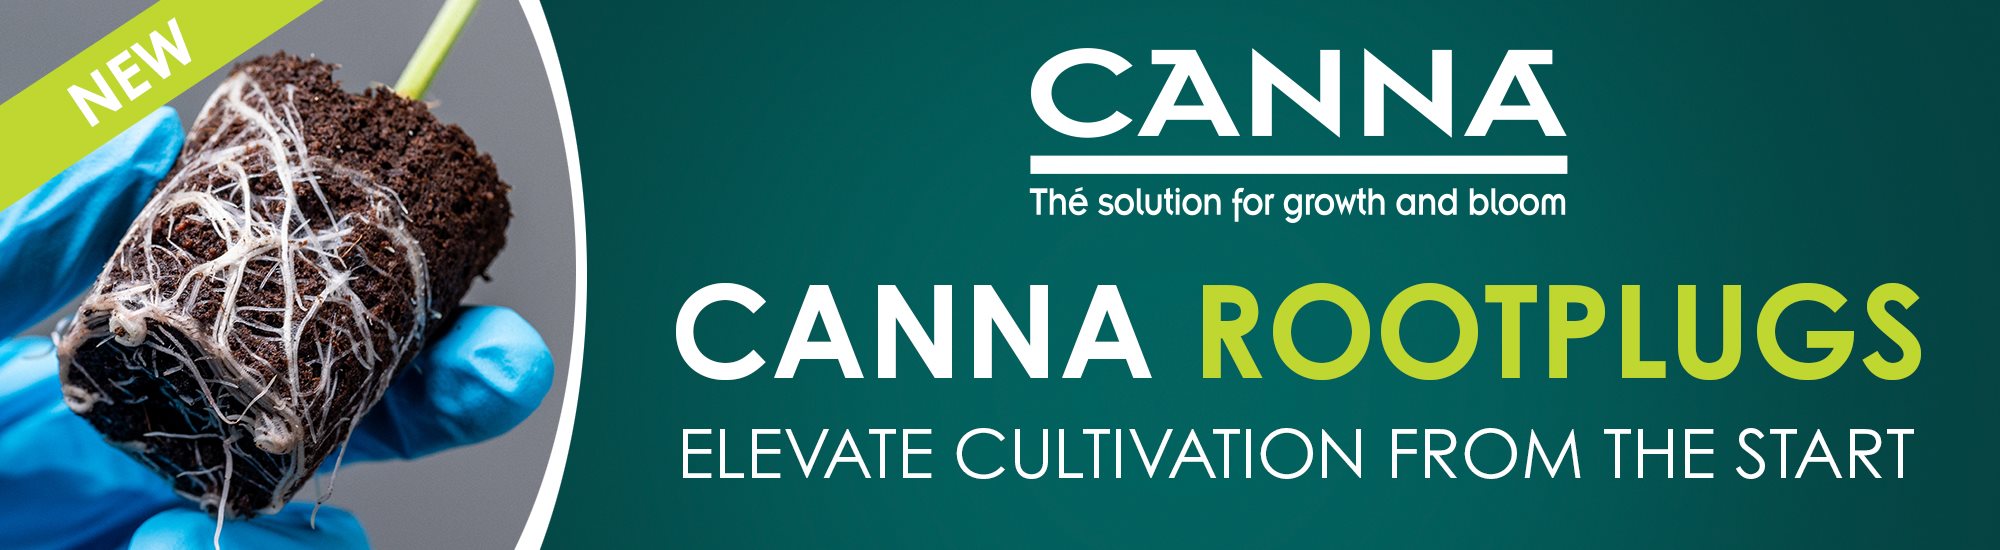 CANNA ROOTPLUGS WEB BANNER - ENG - NEW